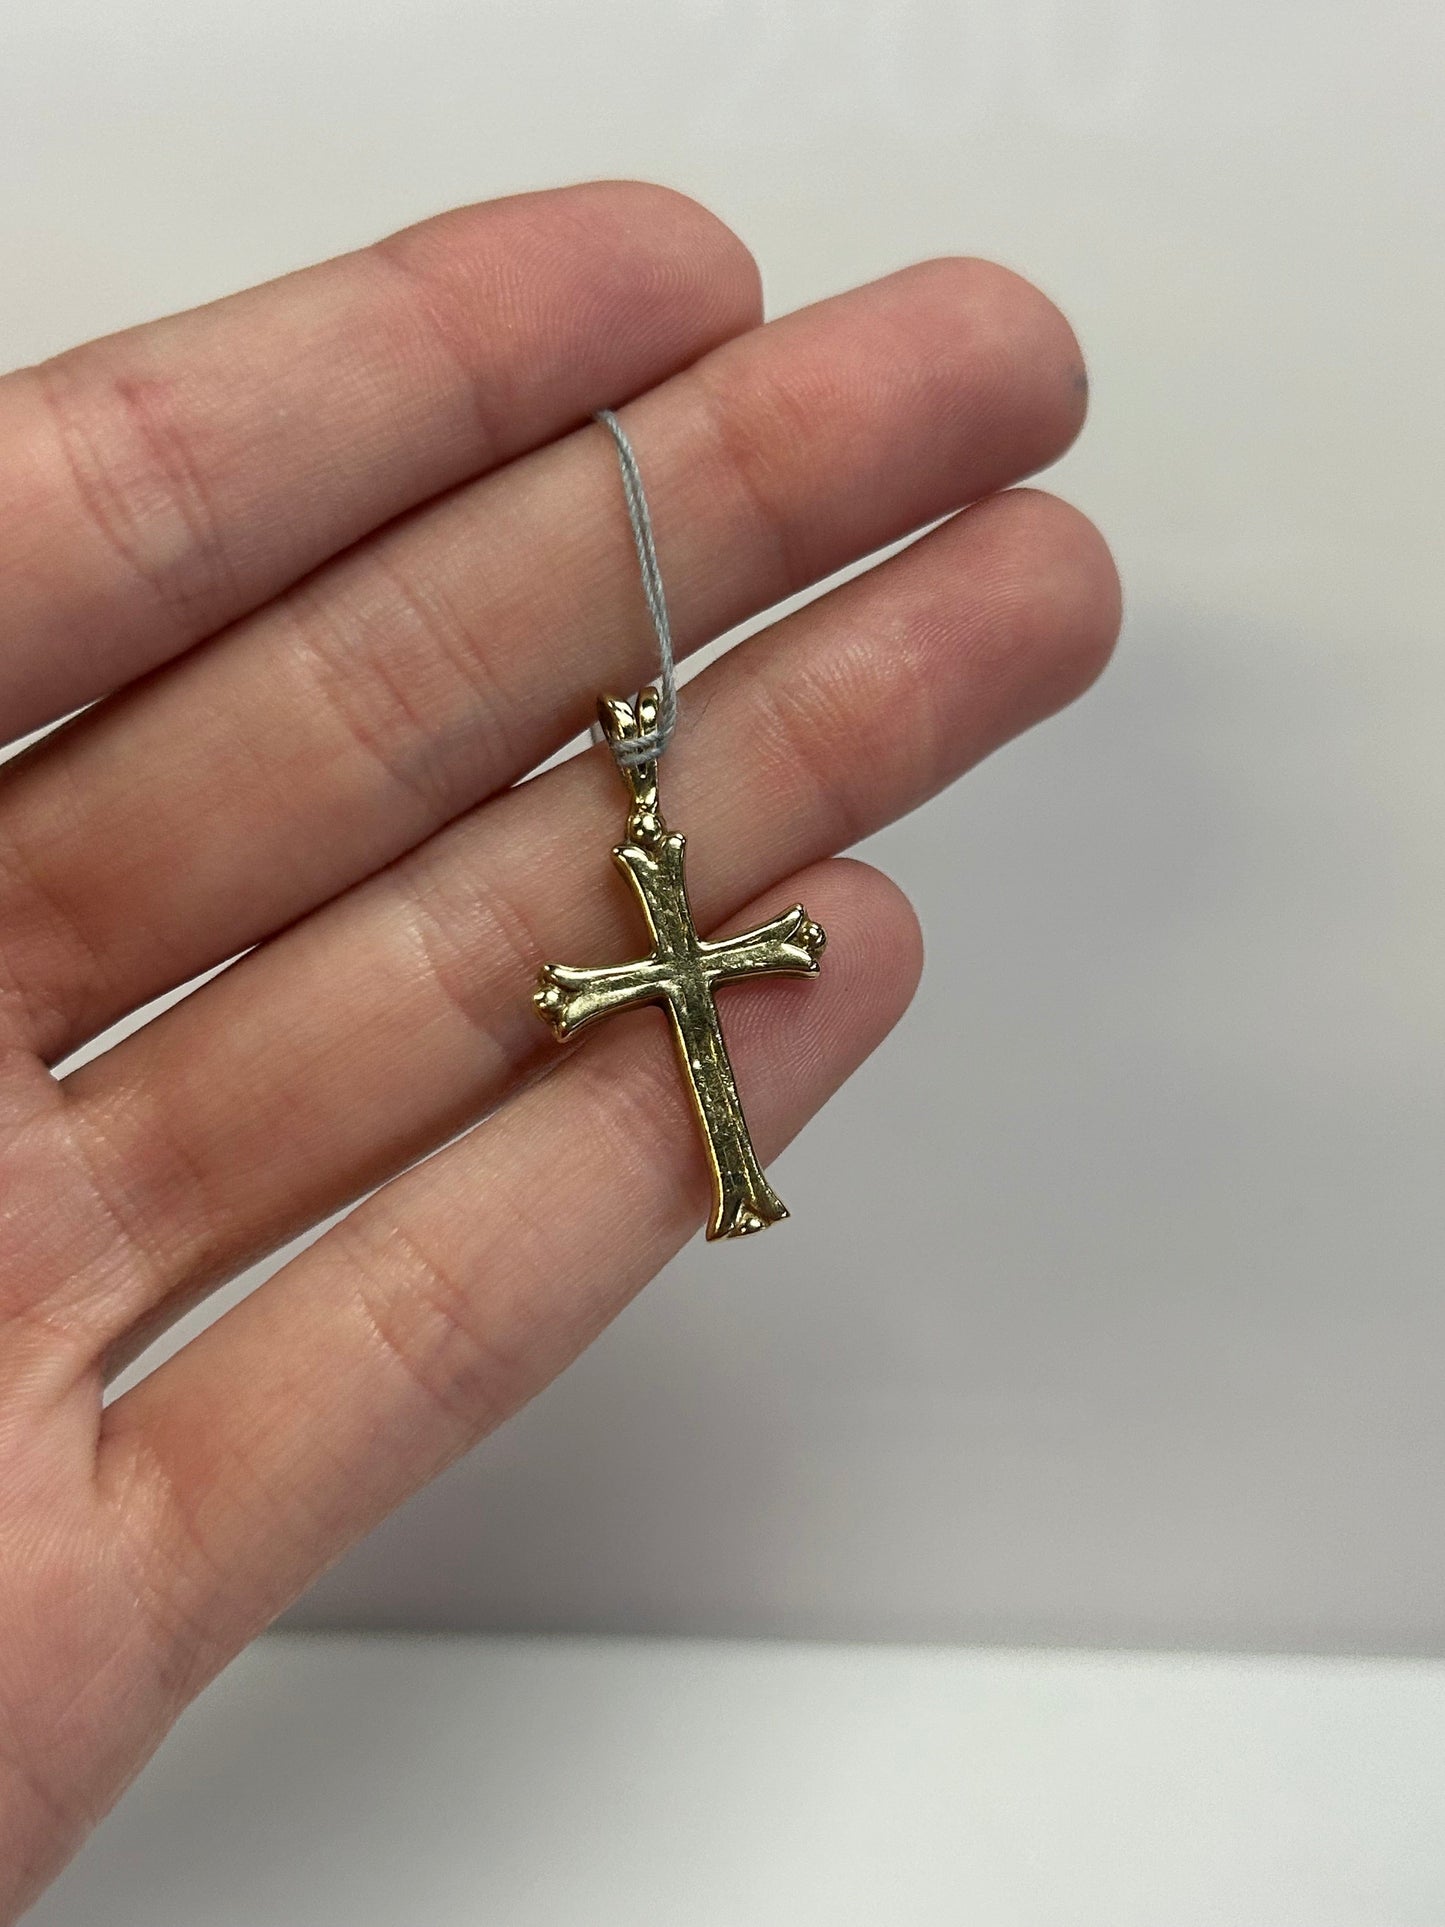 a person is holding a cross pendant in their hand